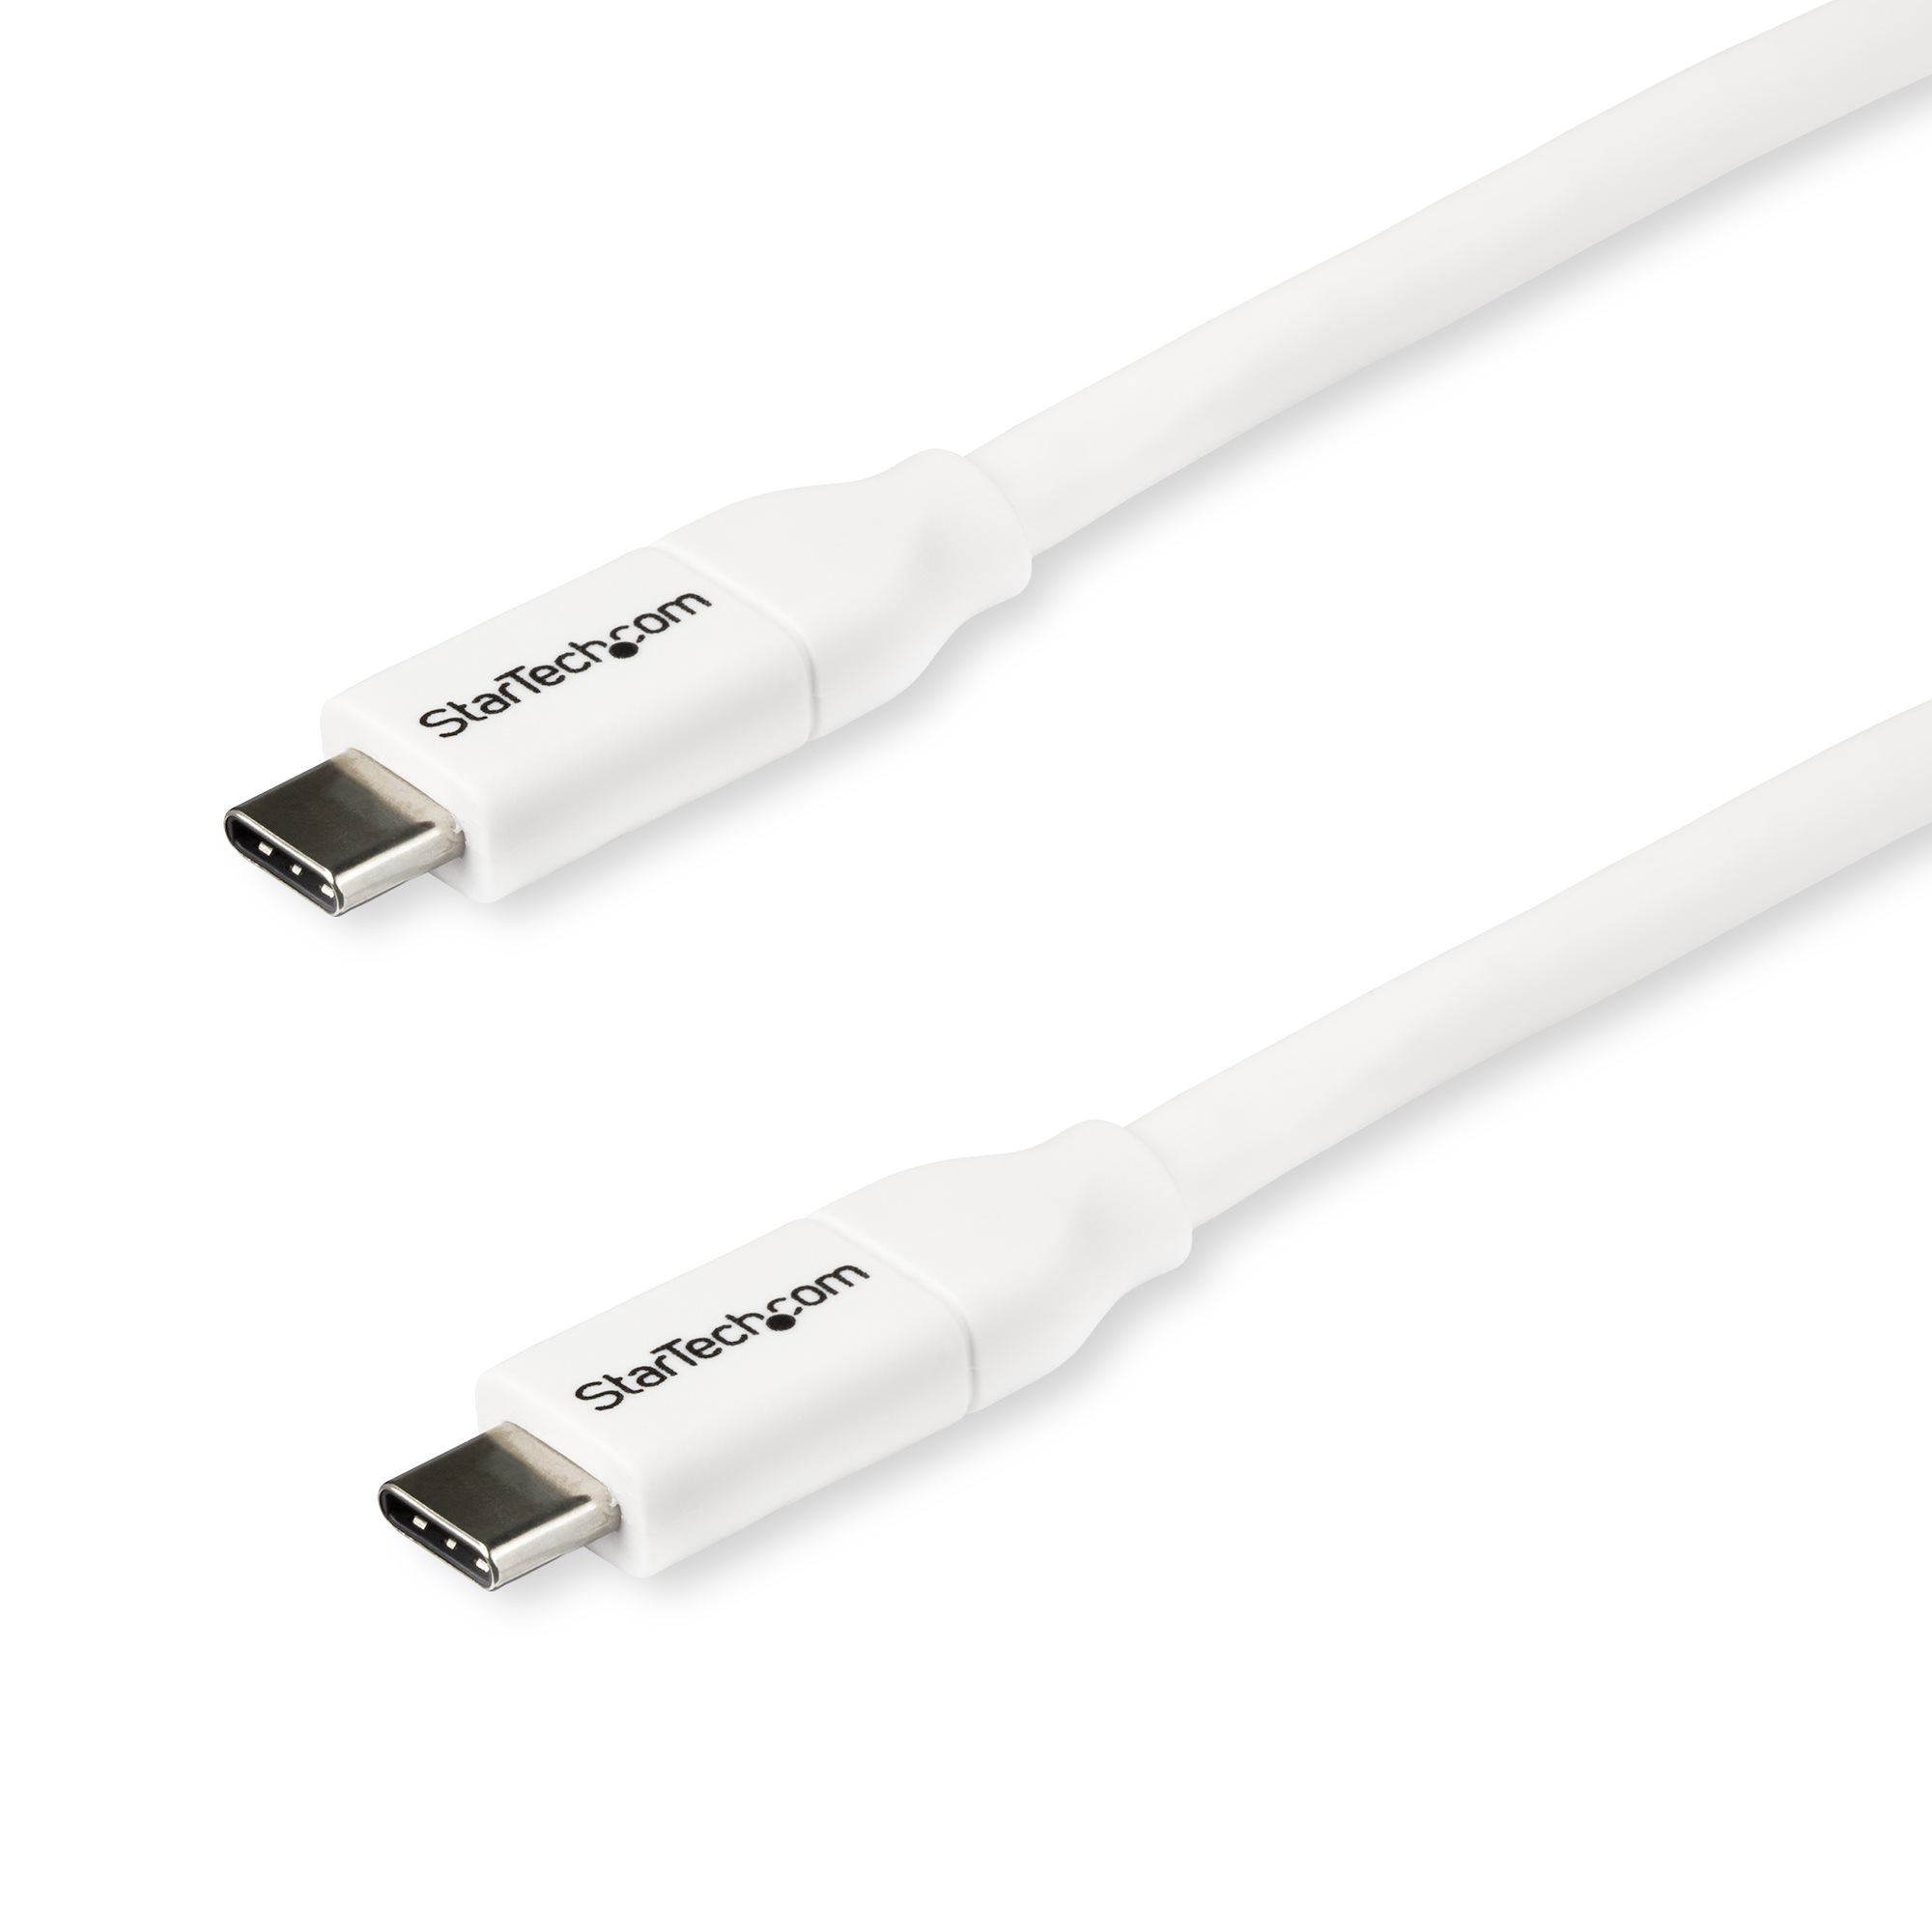 StarTech.com 2m USB 2.0 A to A Cable MM Connect USB 2.0 devices to